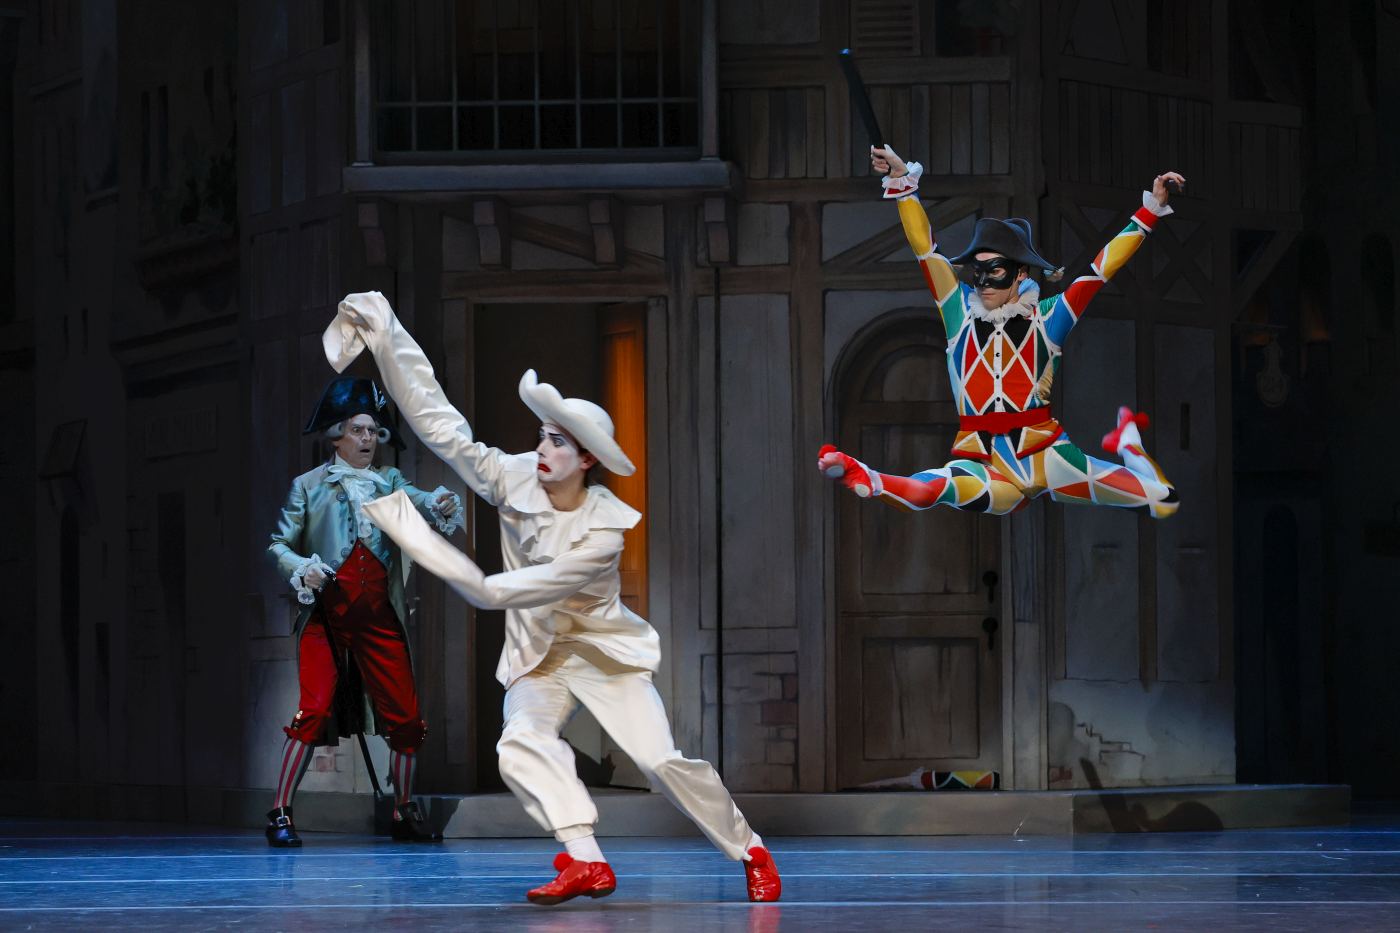 7. S.Heathcote (Cassandre), C.Linnane (Pierrot), and B.Chynoweth (Harlequin), “Harlequinade” by M.Petipa, additional choreography by A.Ratmansky; The Australian Ballet 2022 © J.Busby